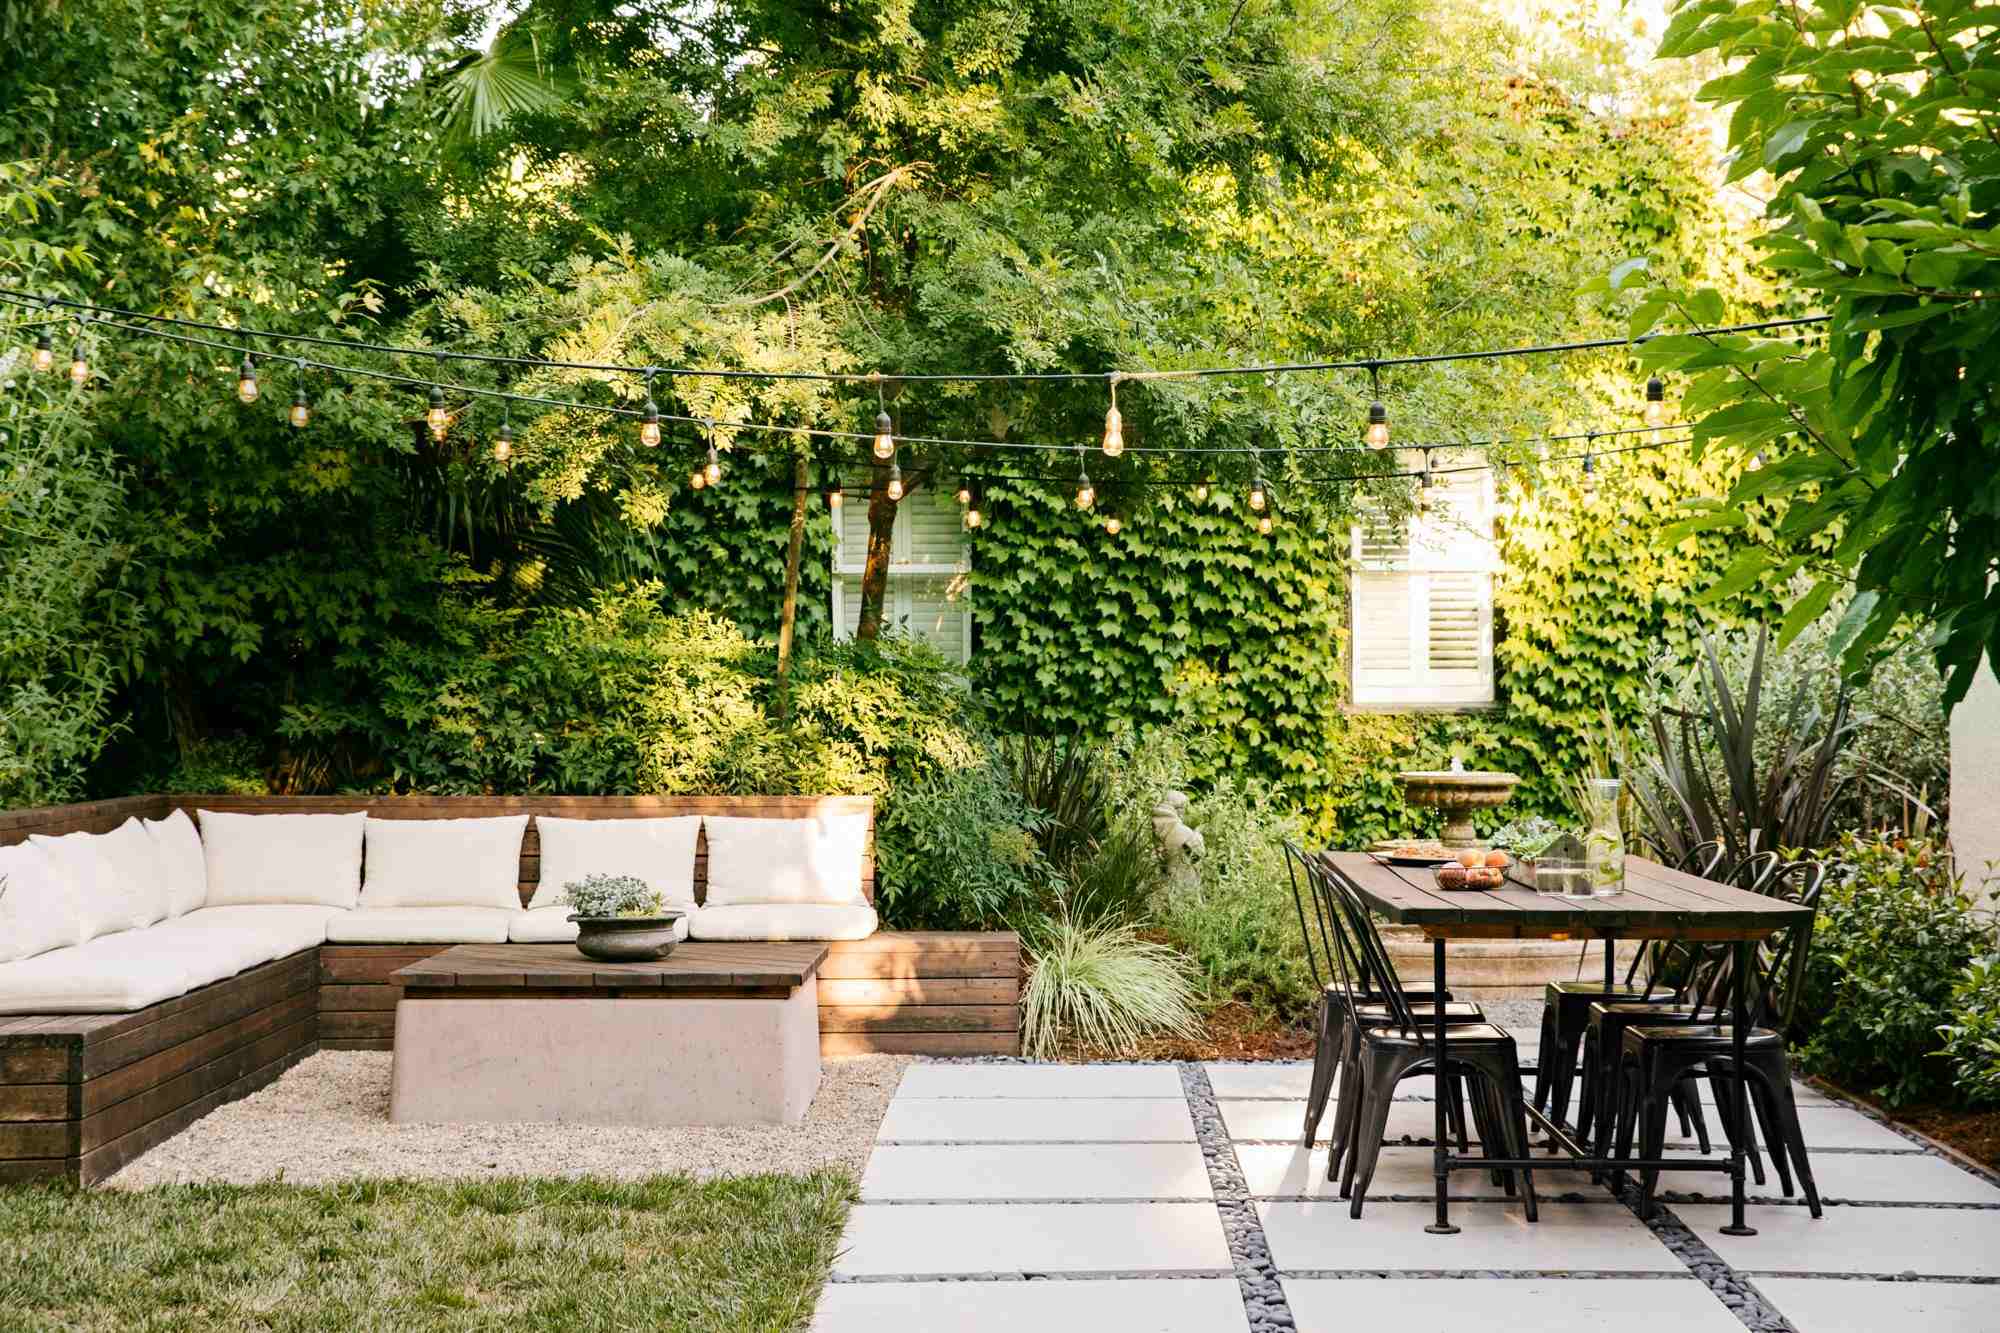 How To Put Pavers In Backyard